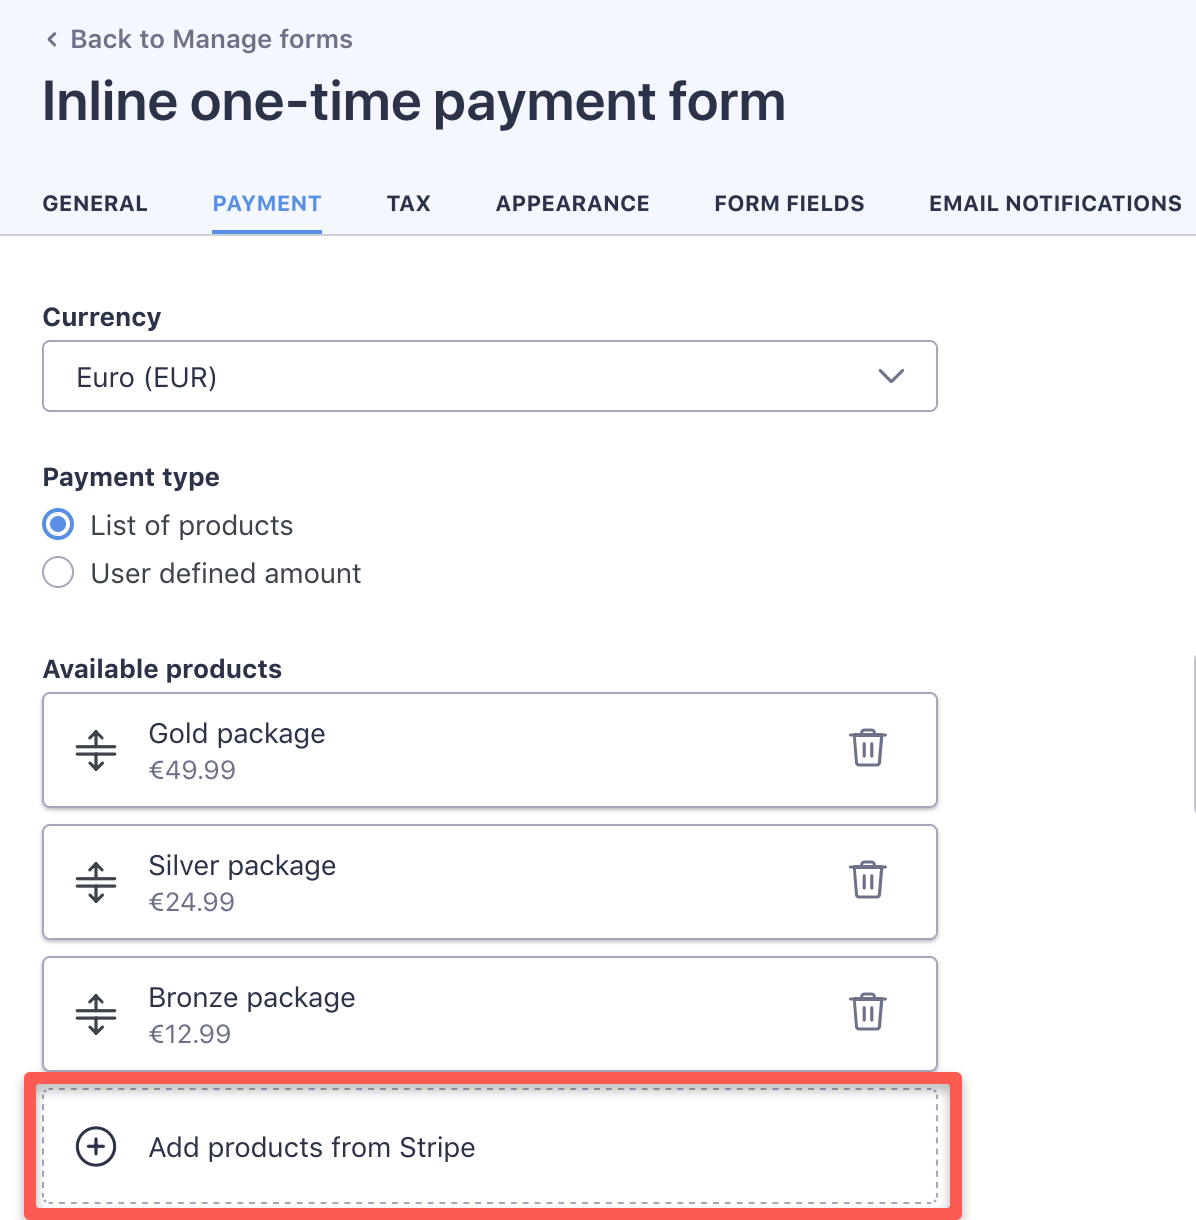 WP Full Stripe - One-time payment forms utilize Stripe products